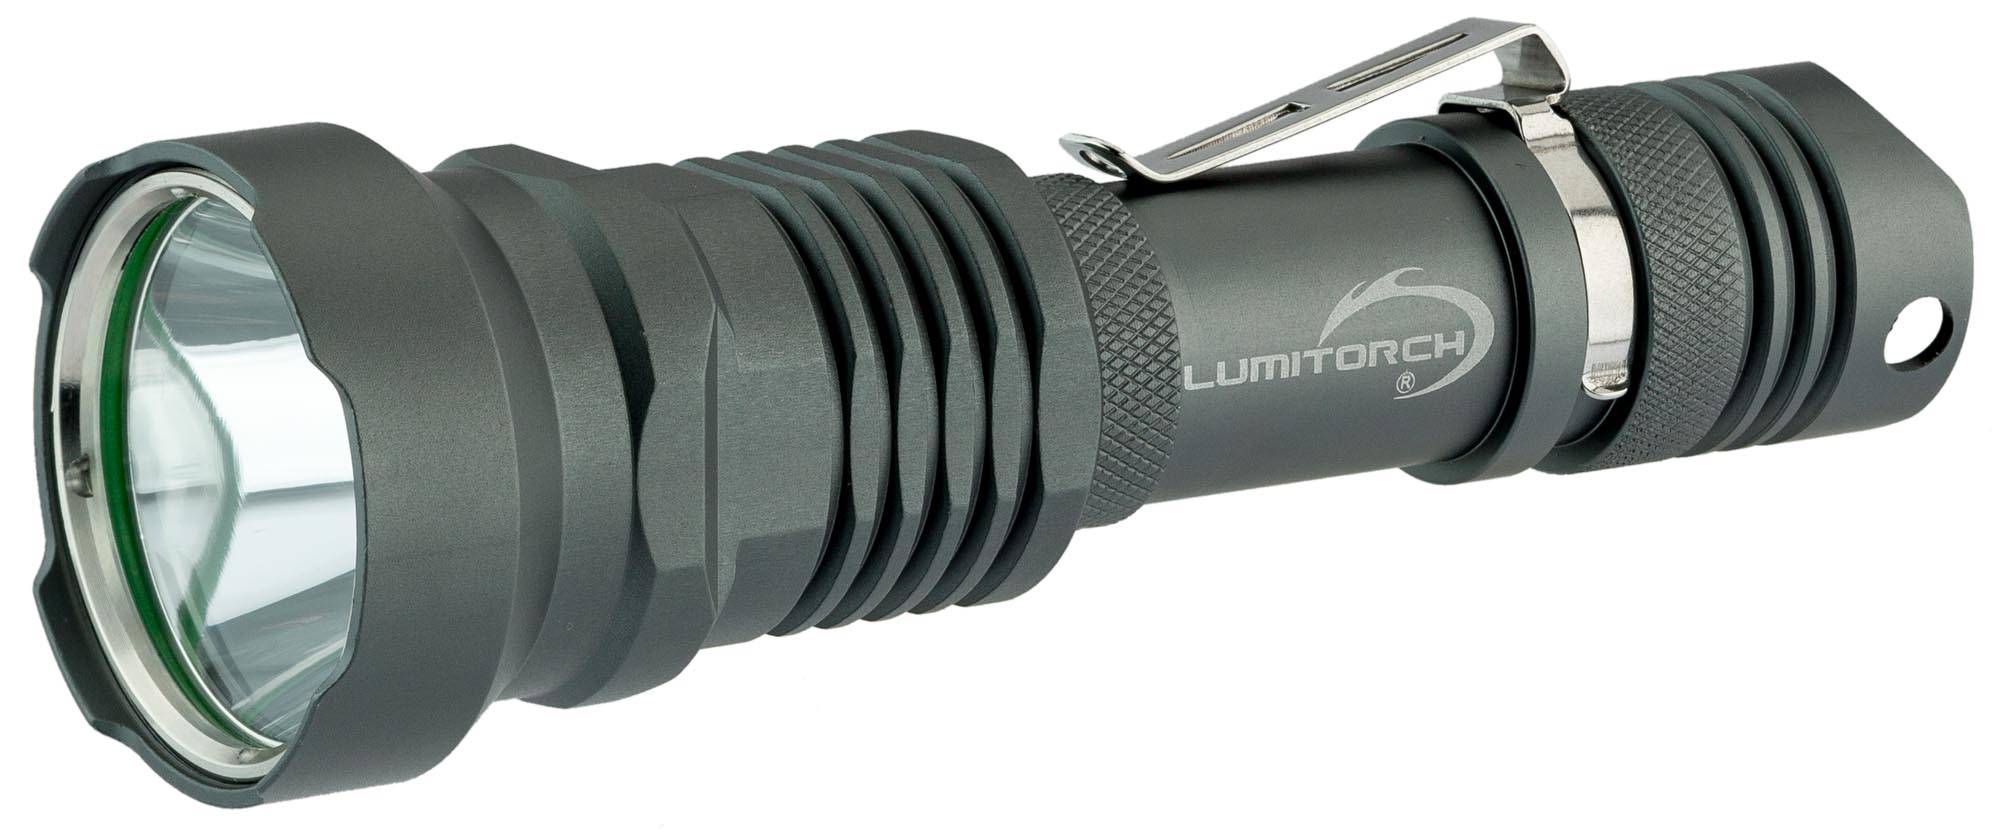  Lampe  torche  LED ultra light  Lumitorch Comet Airsoft